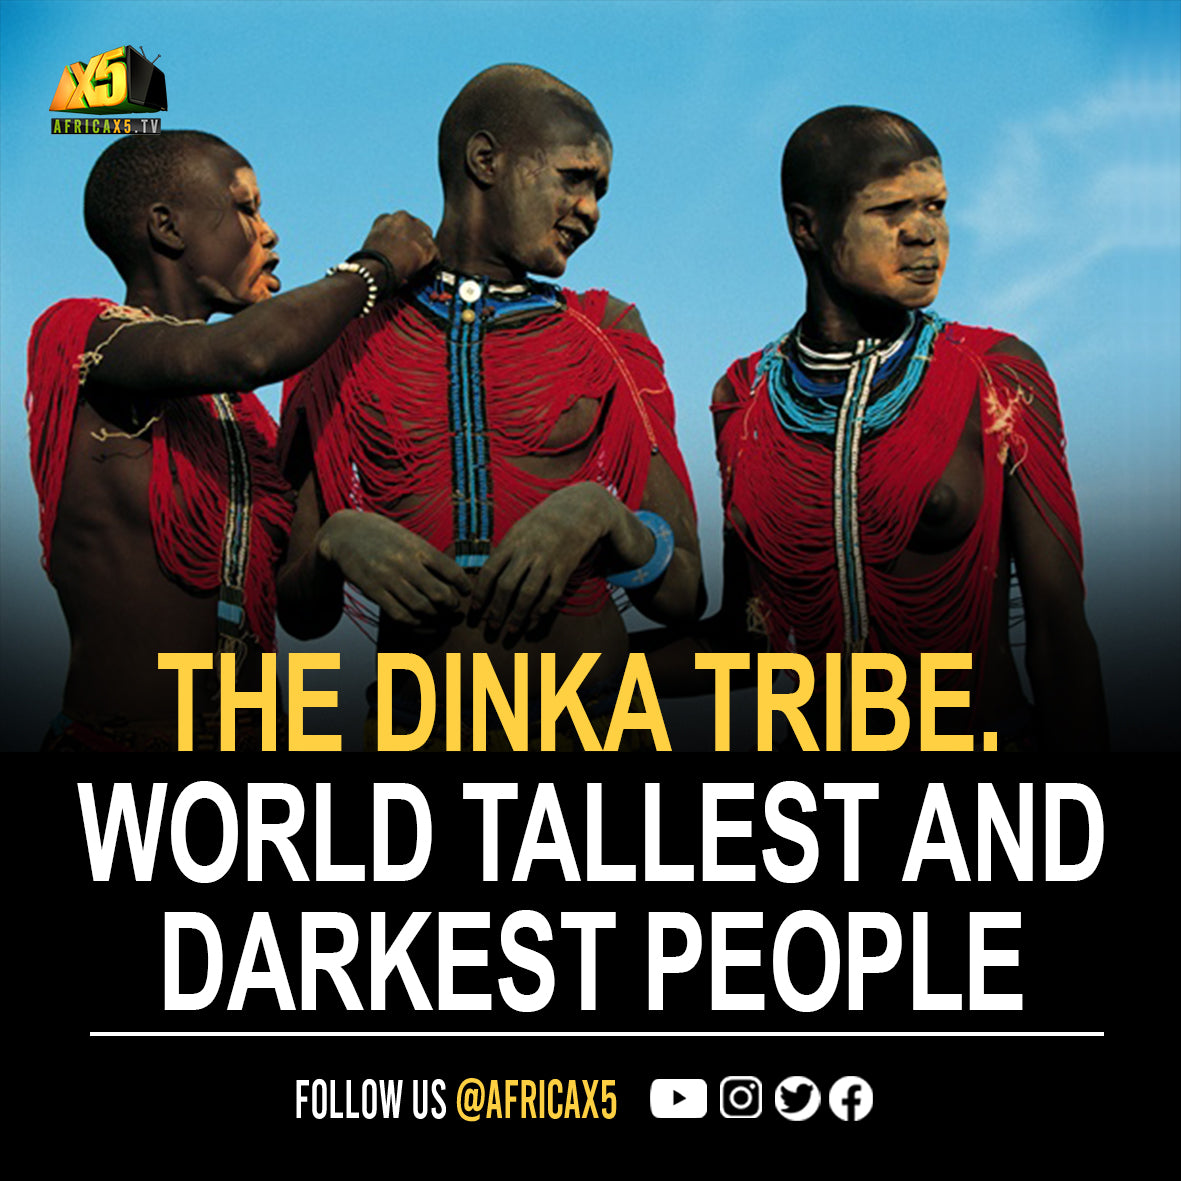 Ancient cultural corsets of Dinka. The world’s darkest & tallest people